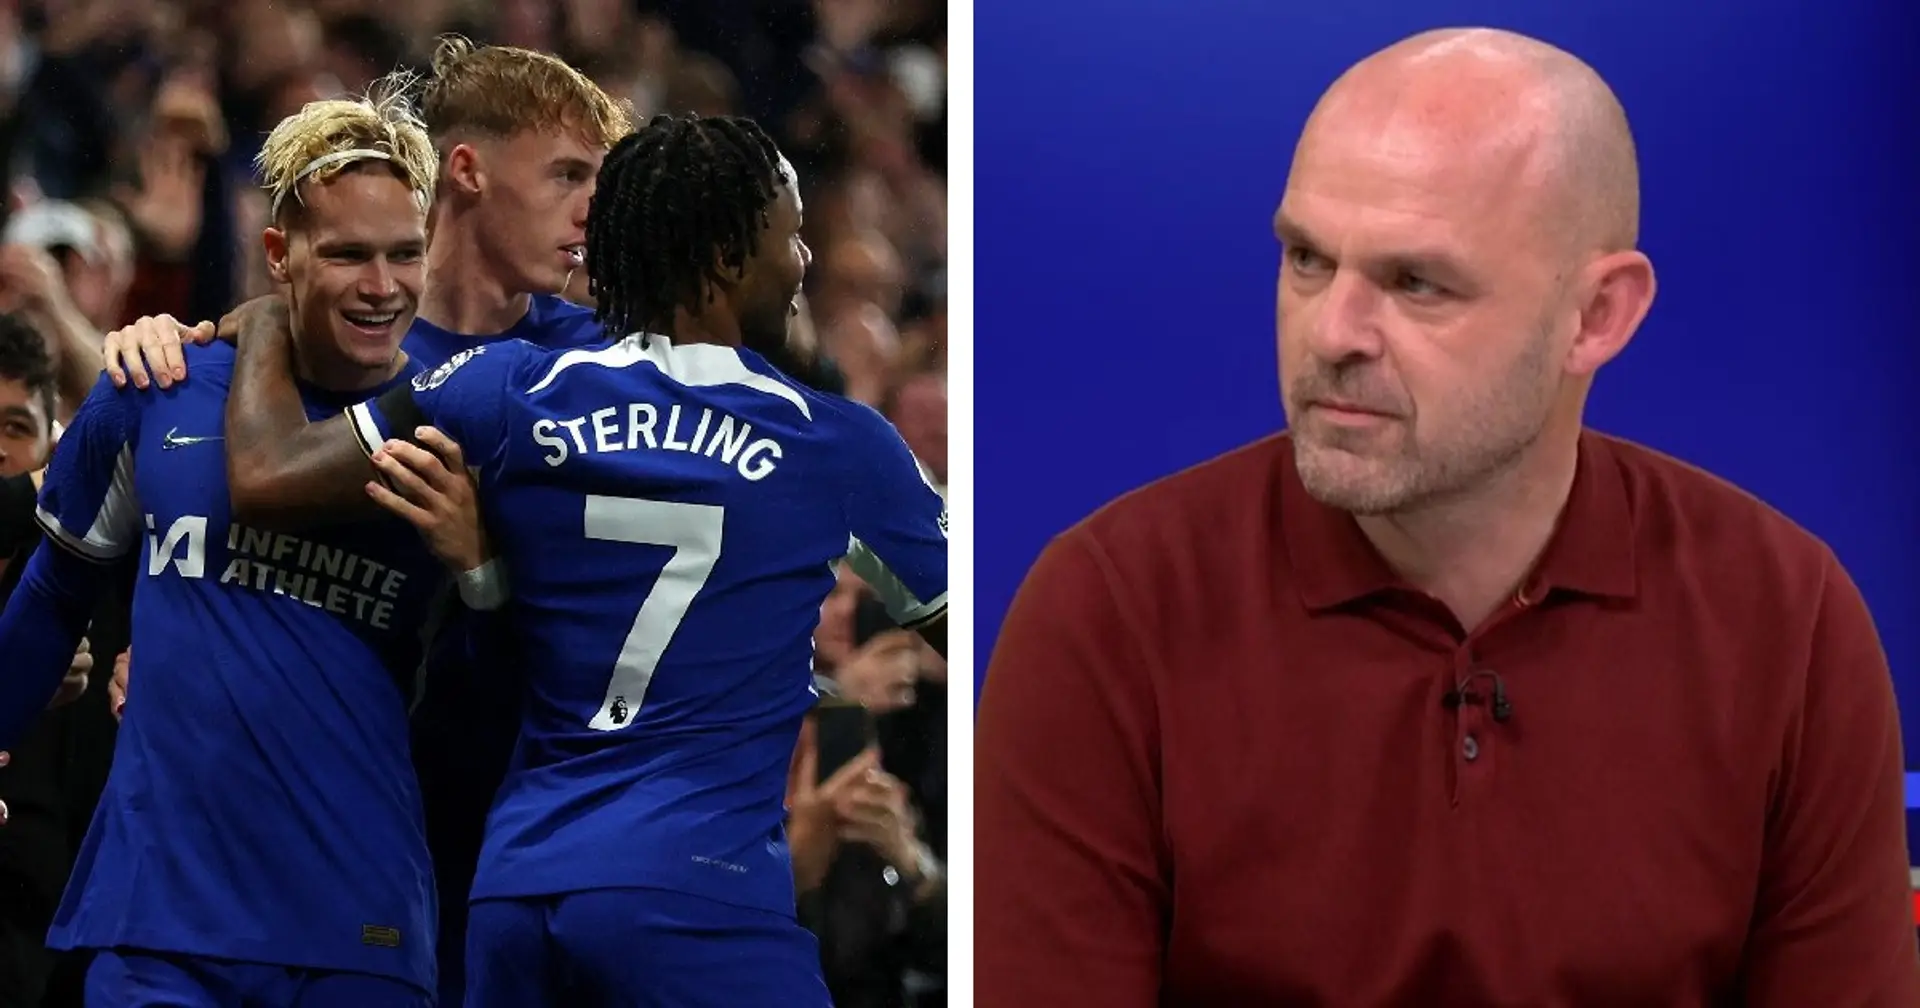 'He's been through a hell of a journey': In-form Chelsea forward tipped for future success despite being 'too late this season'